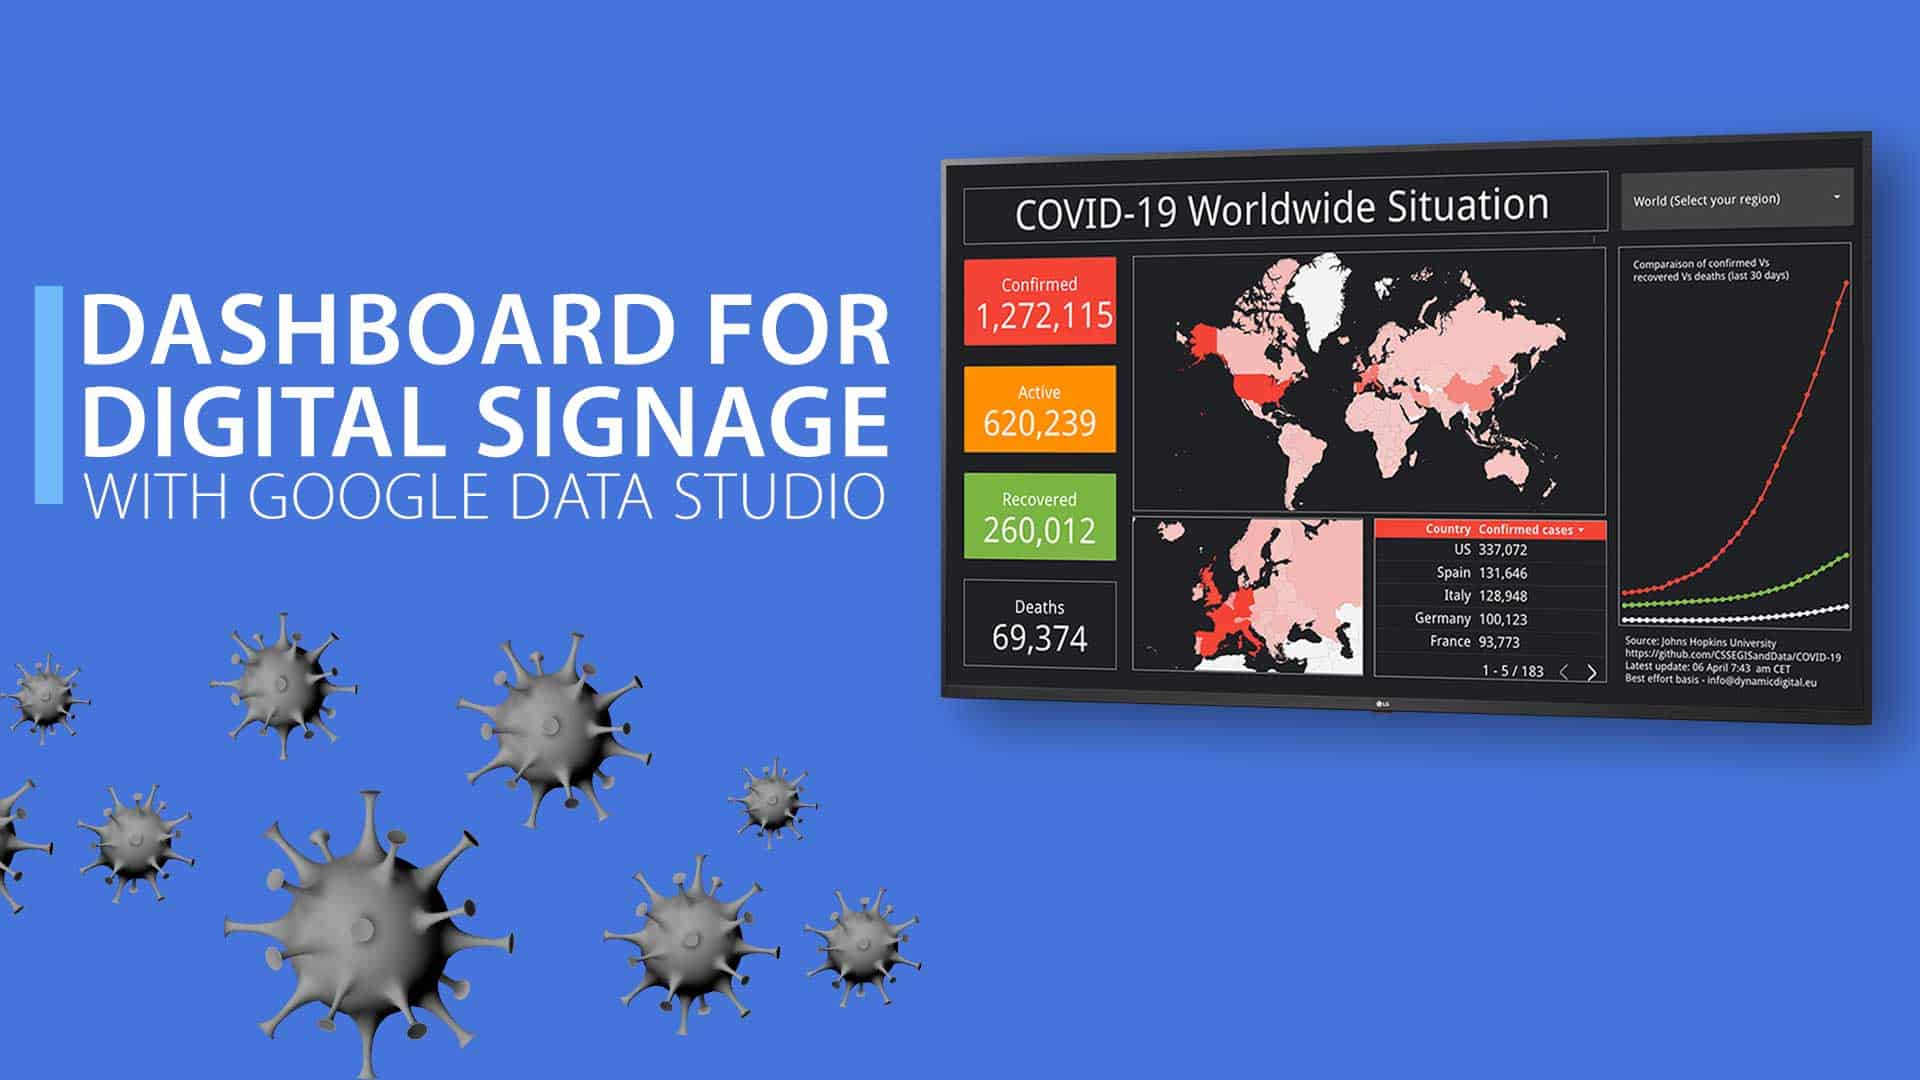 How to use dashboards for digital signage